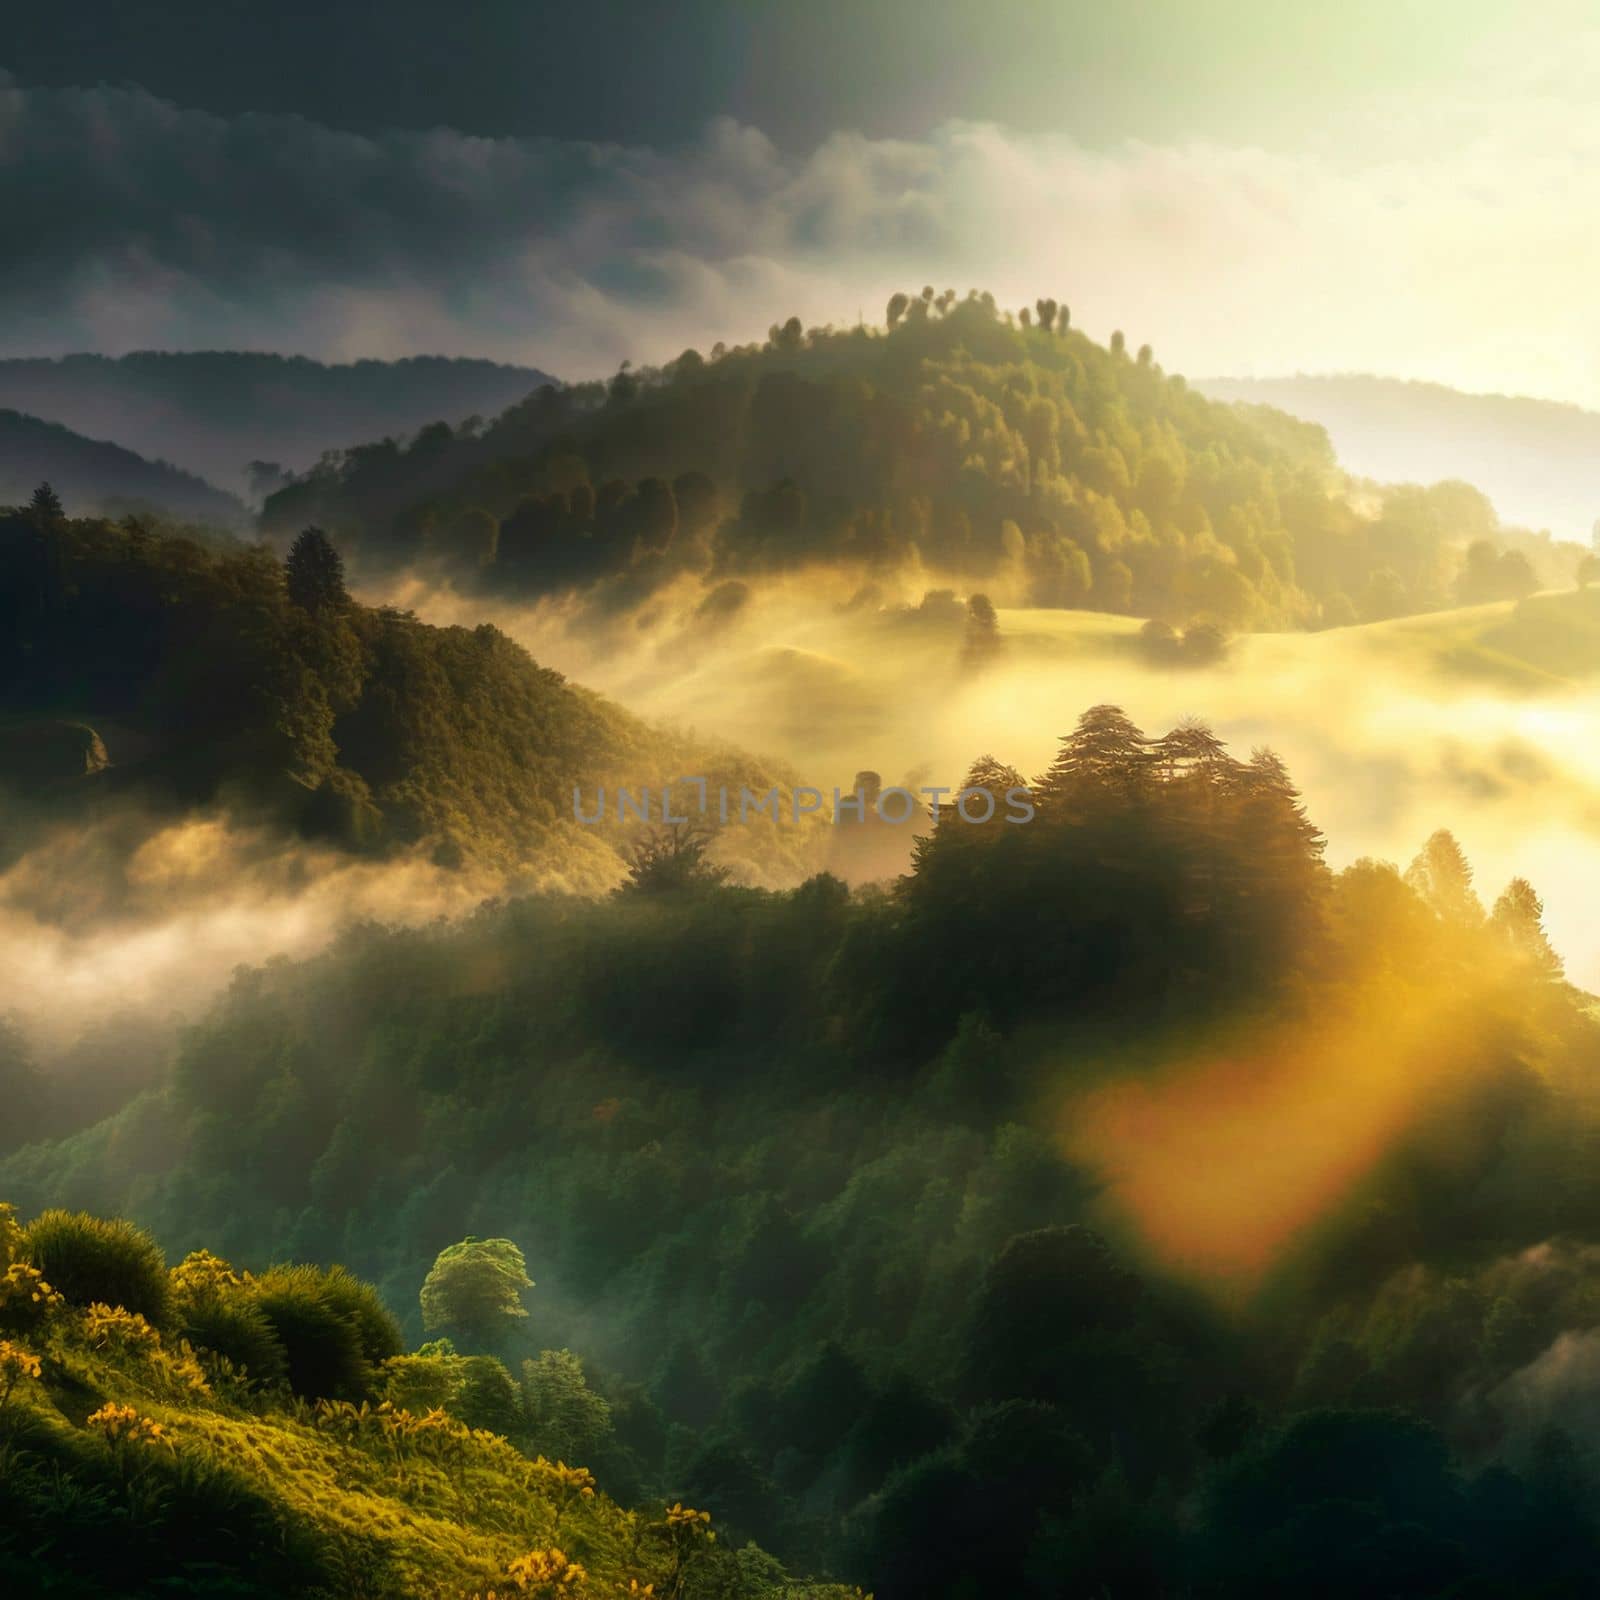 A forest in the mountains, shrouded in morning fog by NeuroSky